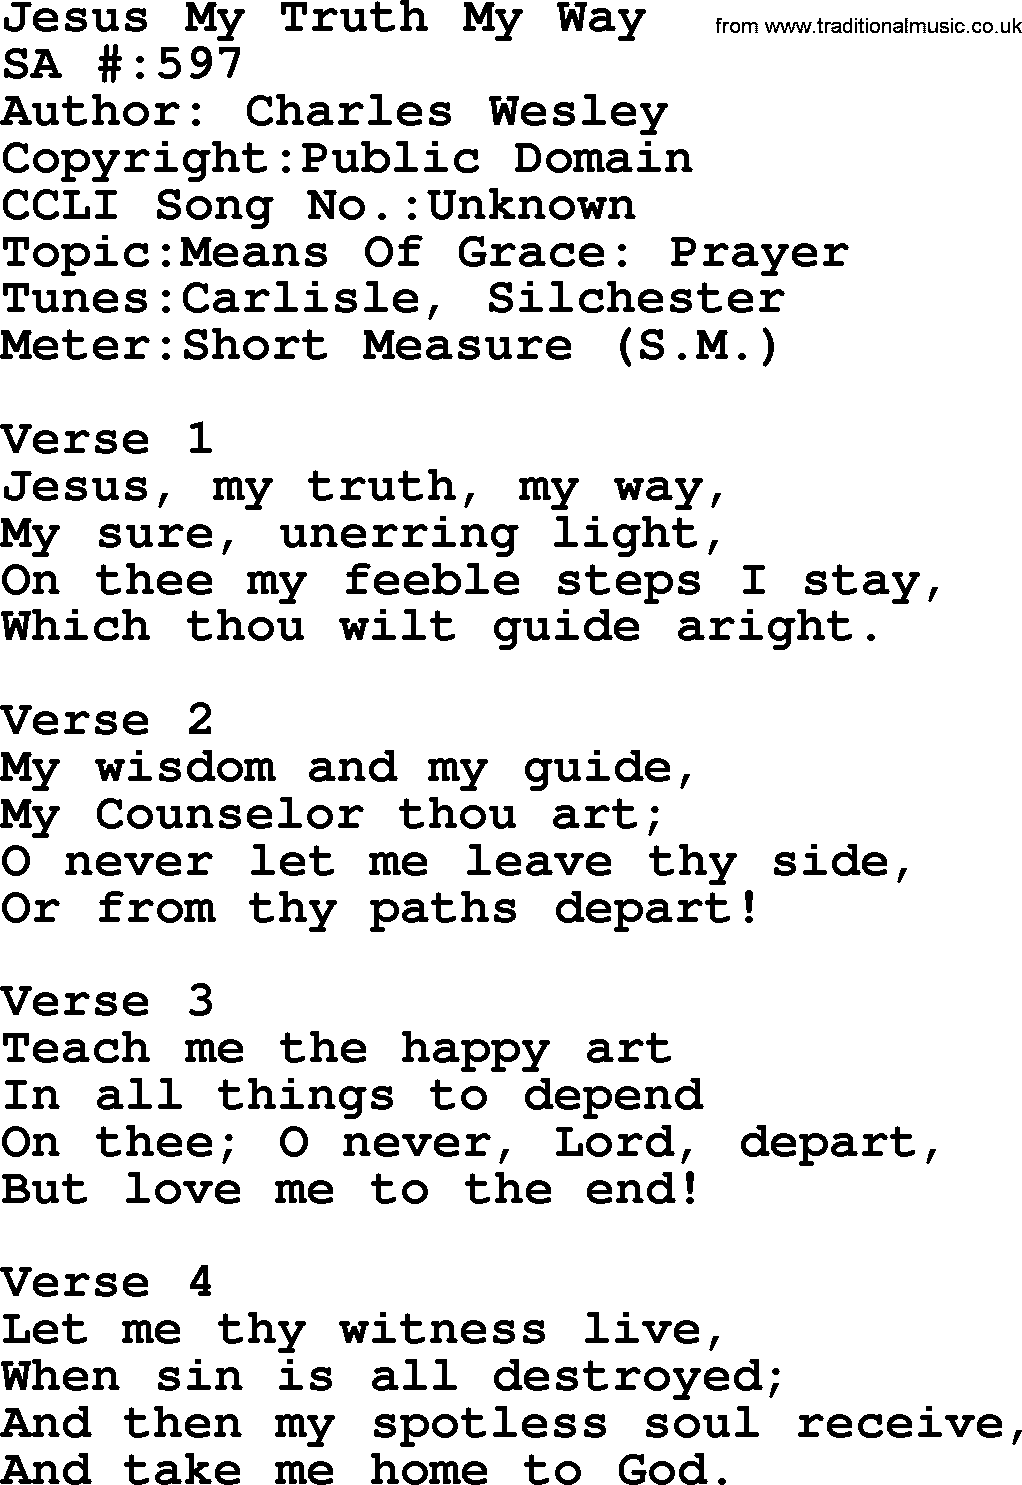 Salvation Army Hymnal, title: Jesus My Truth My Way, with lyrics and PDF,